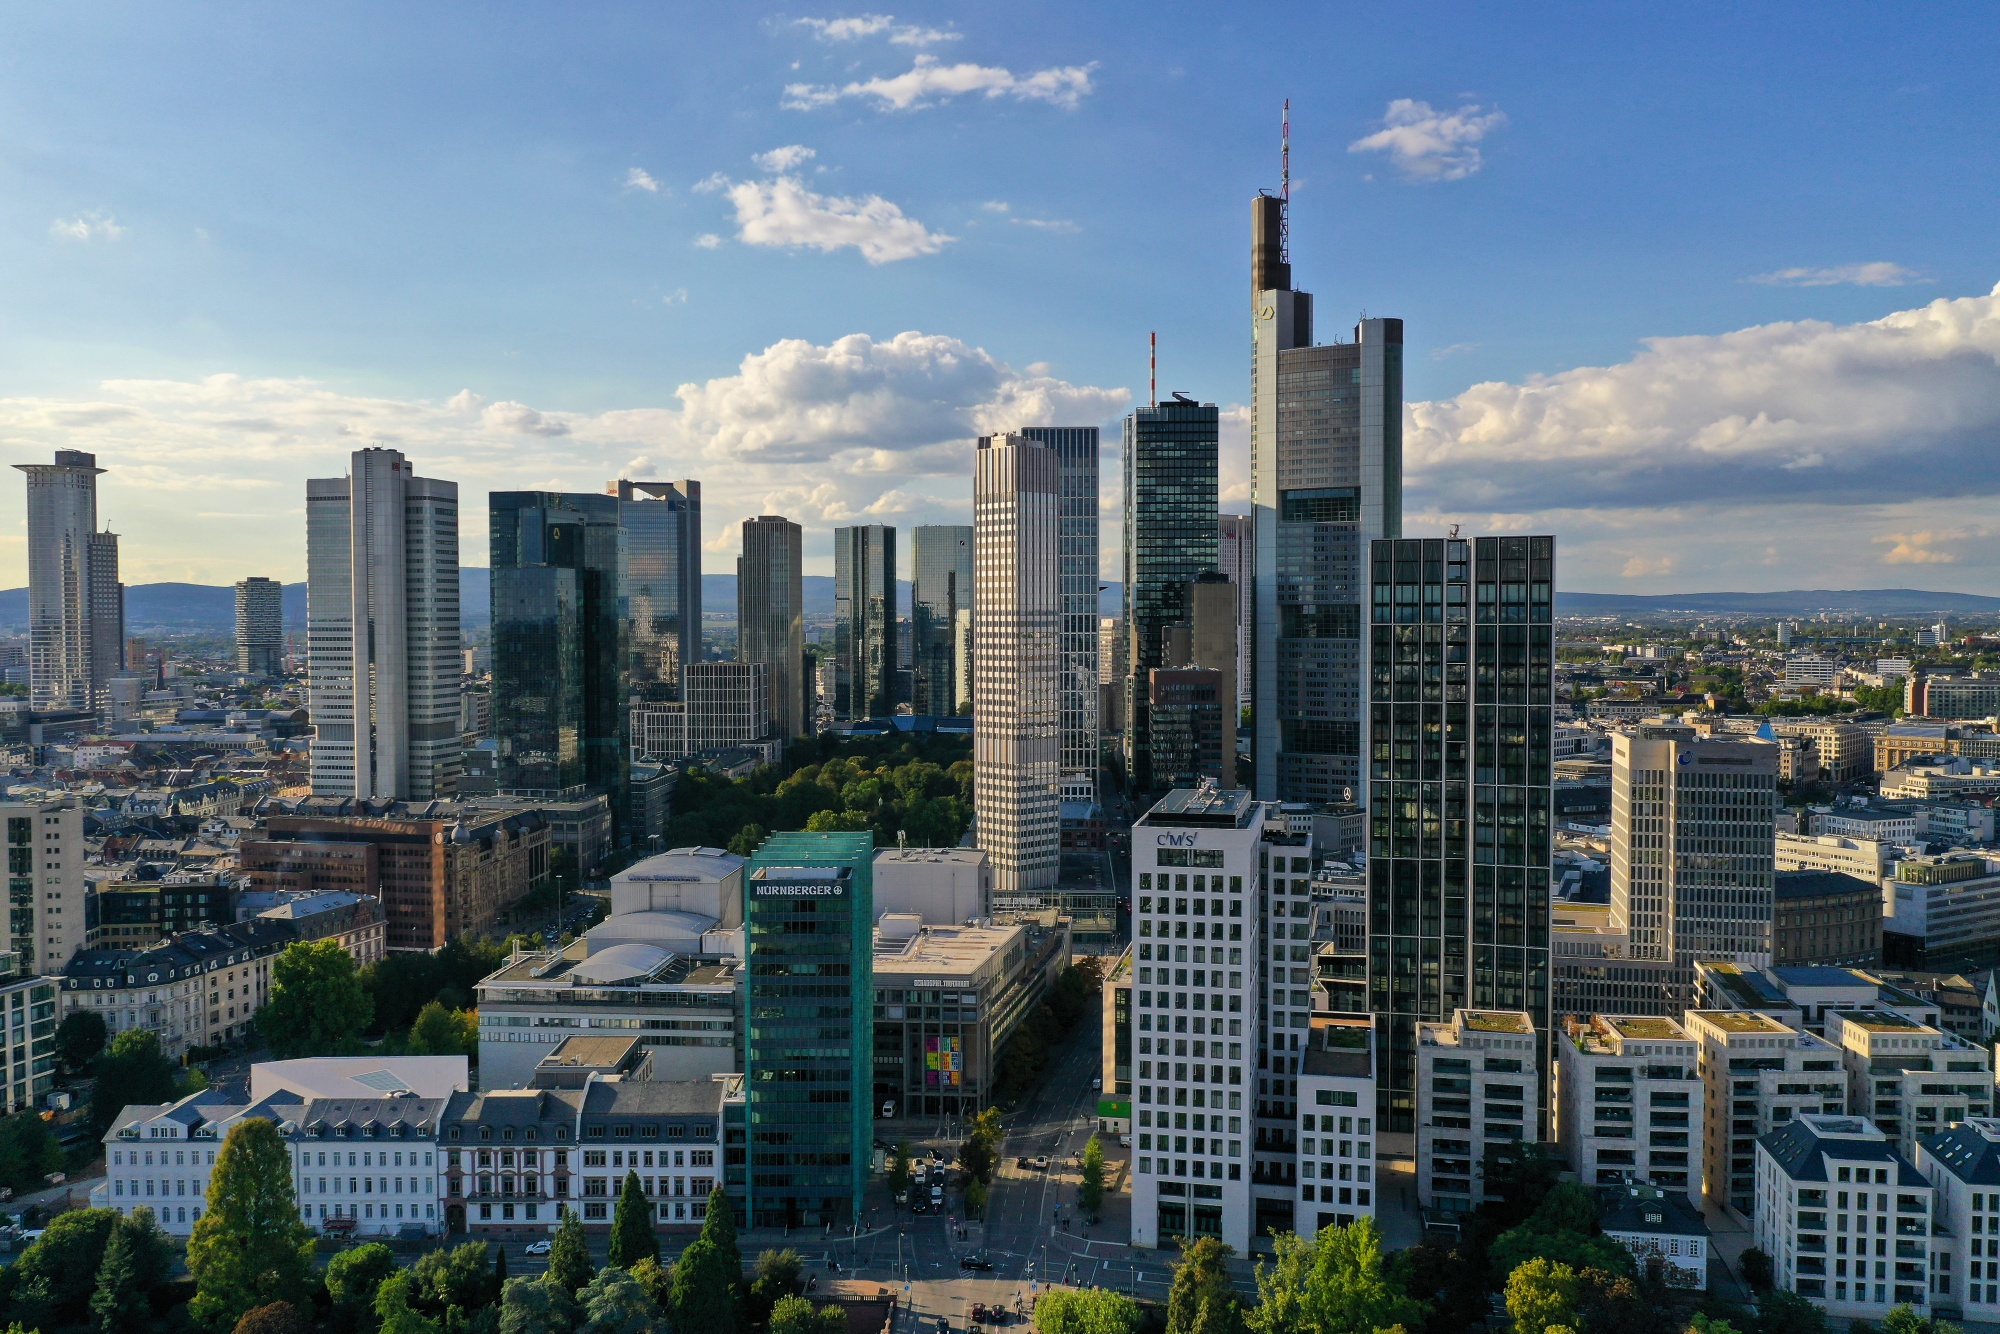 Aerial Views of Germany's Financial Capital